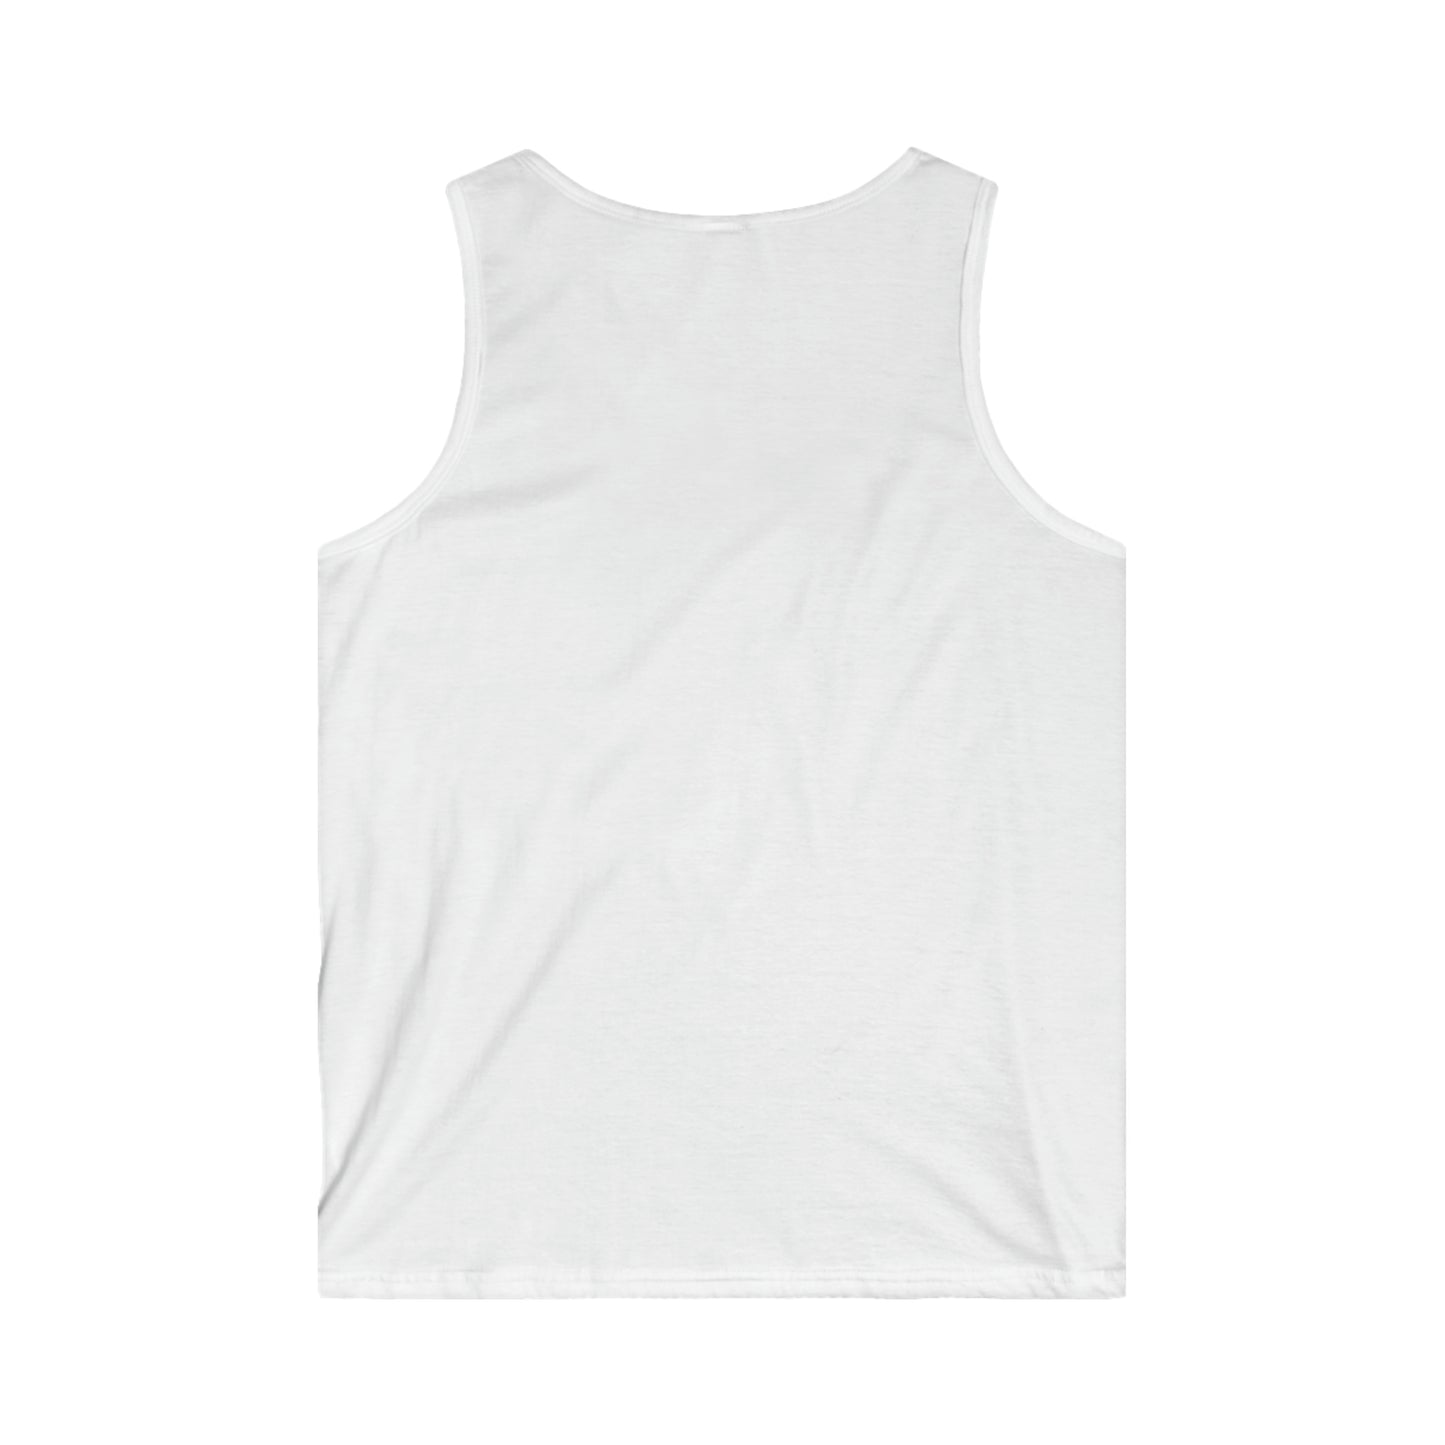 Femboy Hooters Men's Softstyle Tank Top